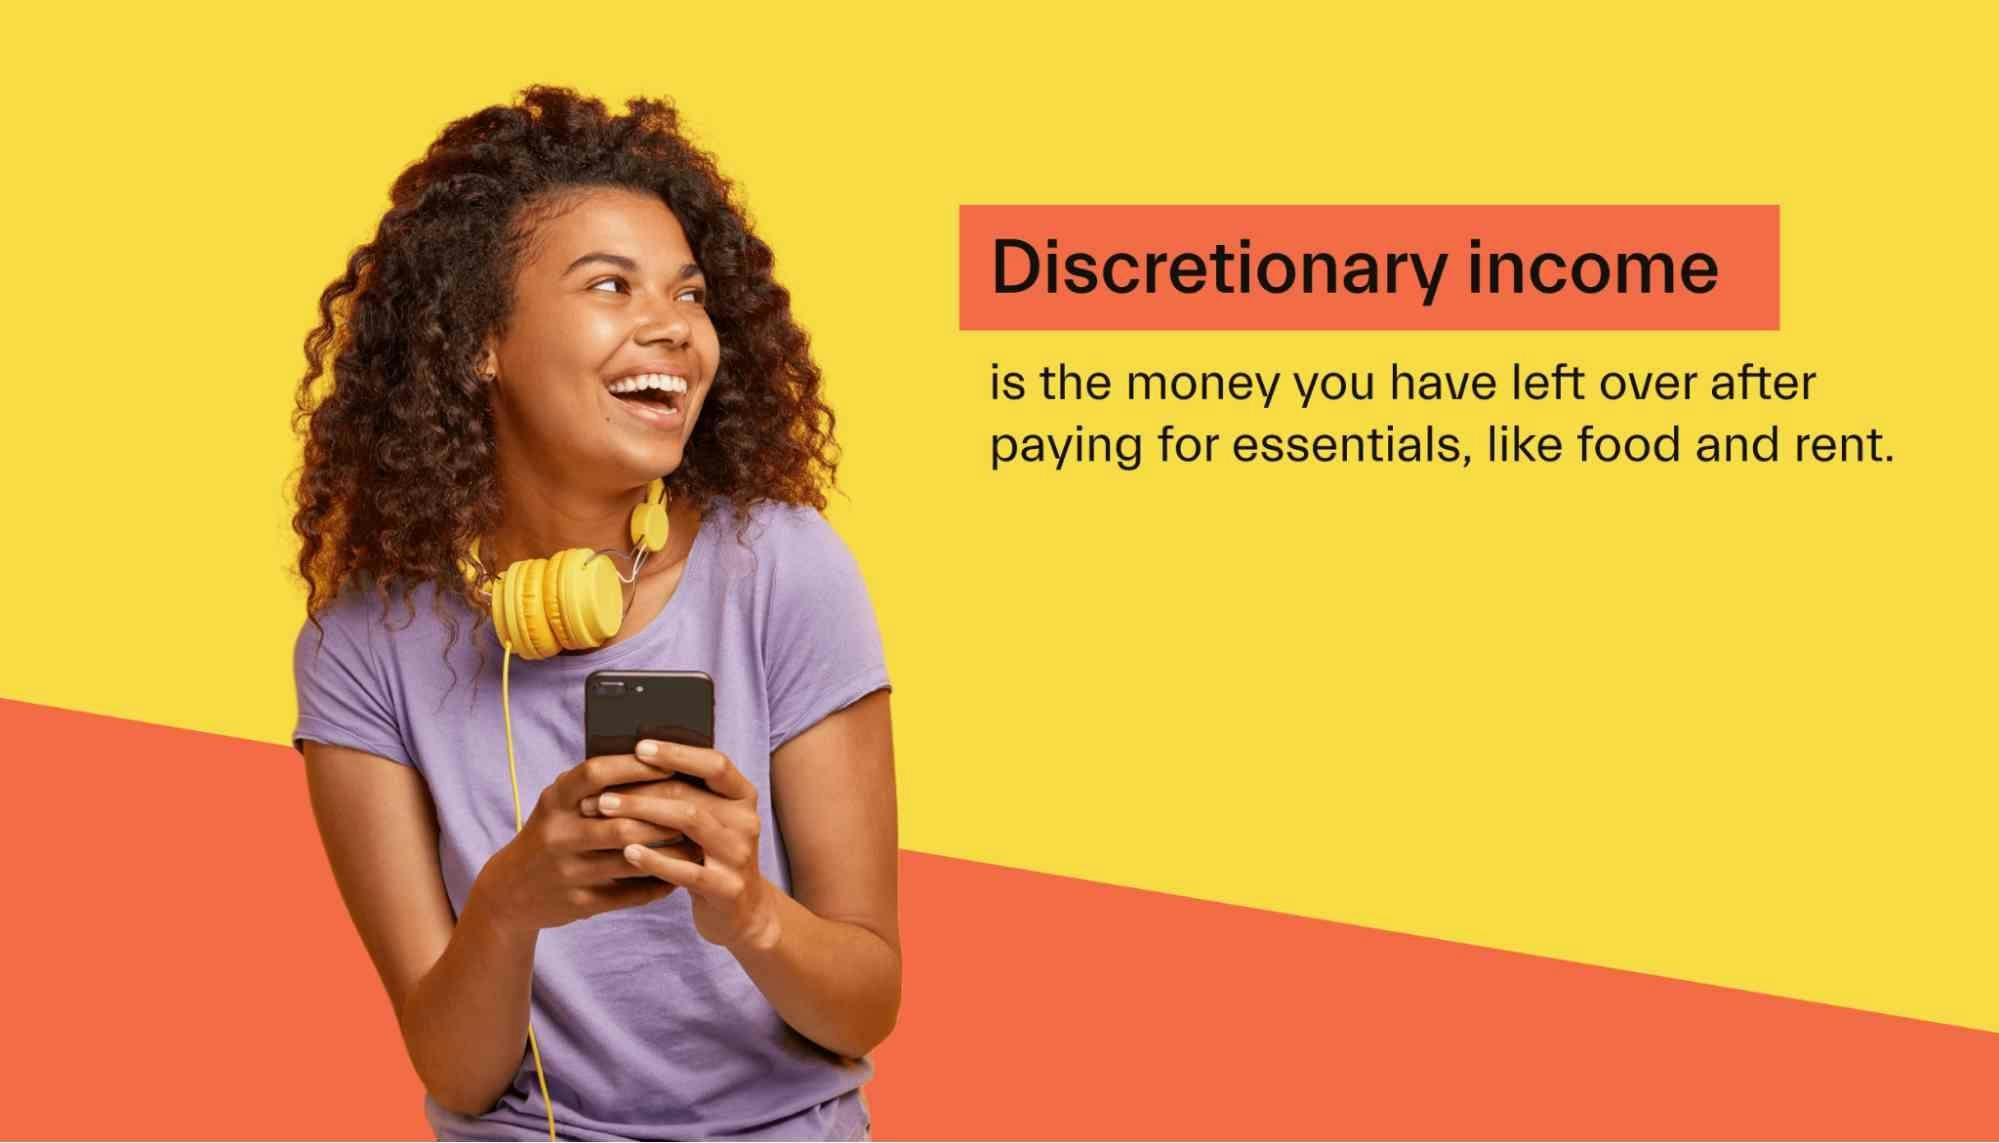 What is discretionary income